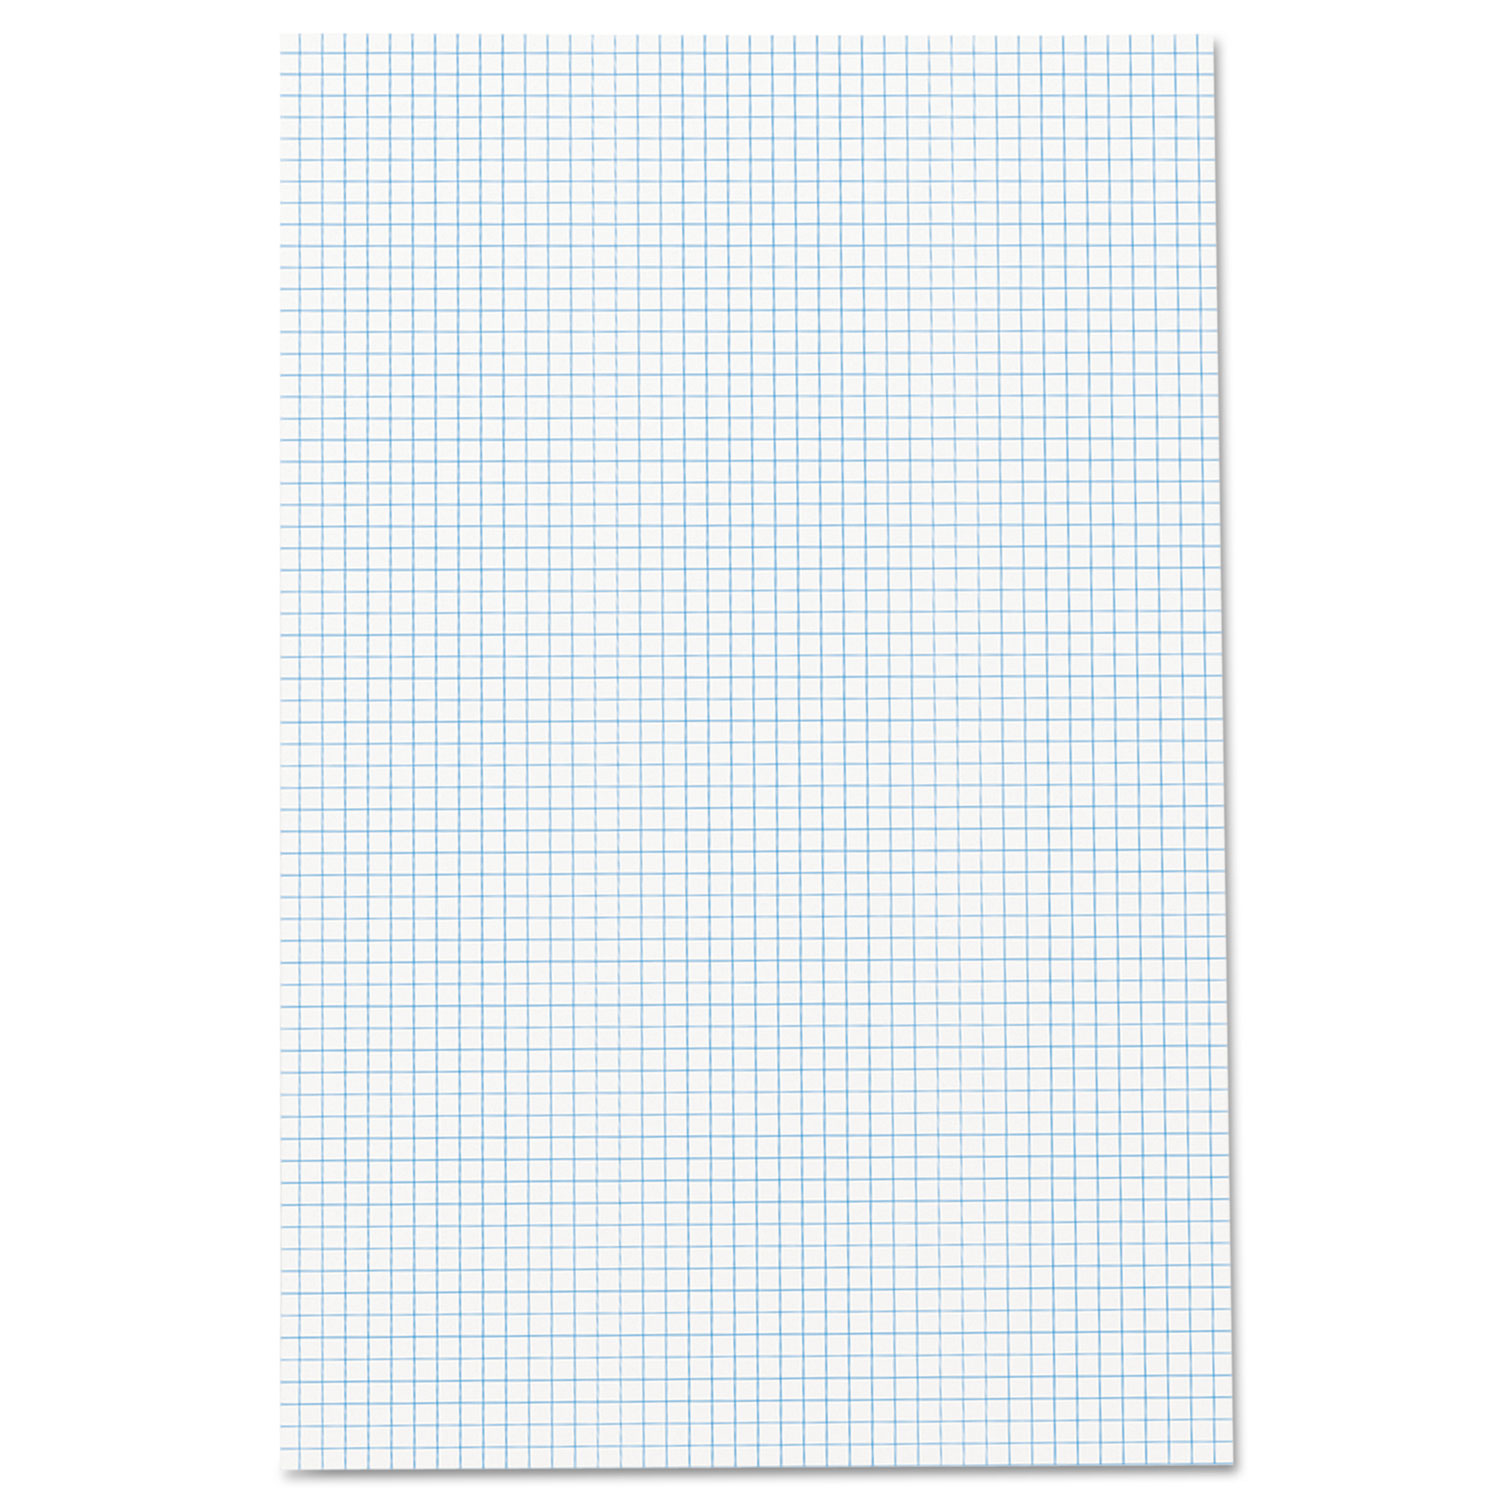  Ampad 22-037 Quadrille Pads, 4 sq/in Quadrille Rule, 11 x 17, White, 50 Sheets (TOP22037) 